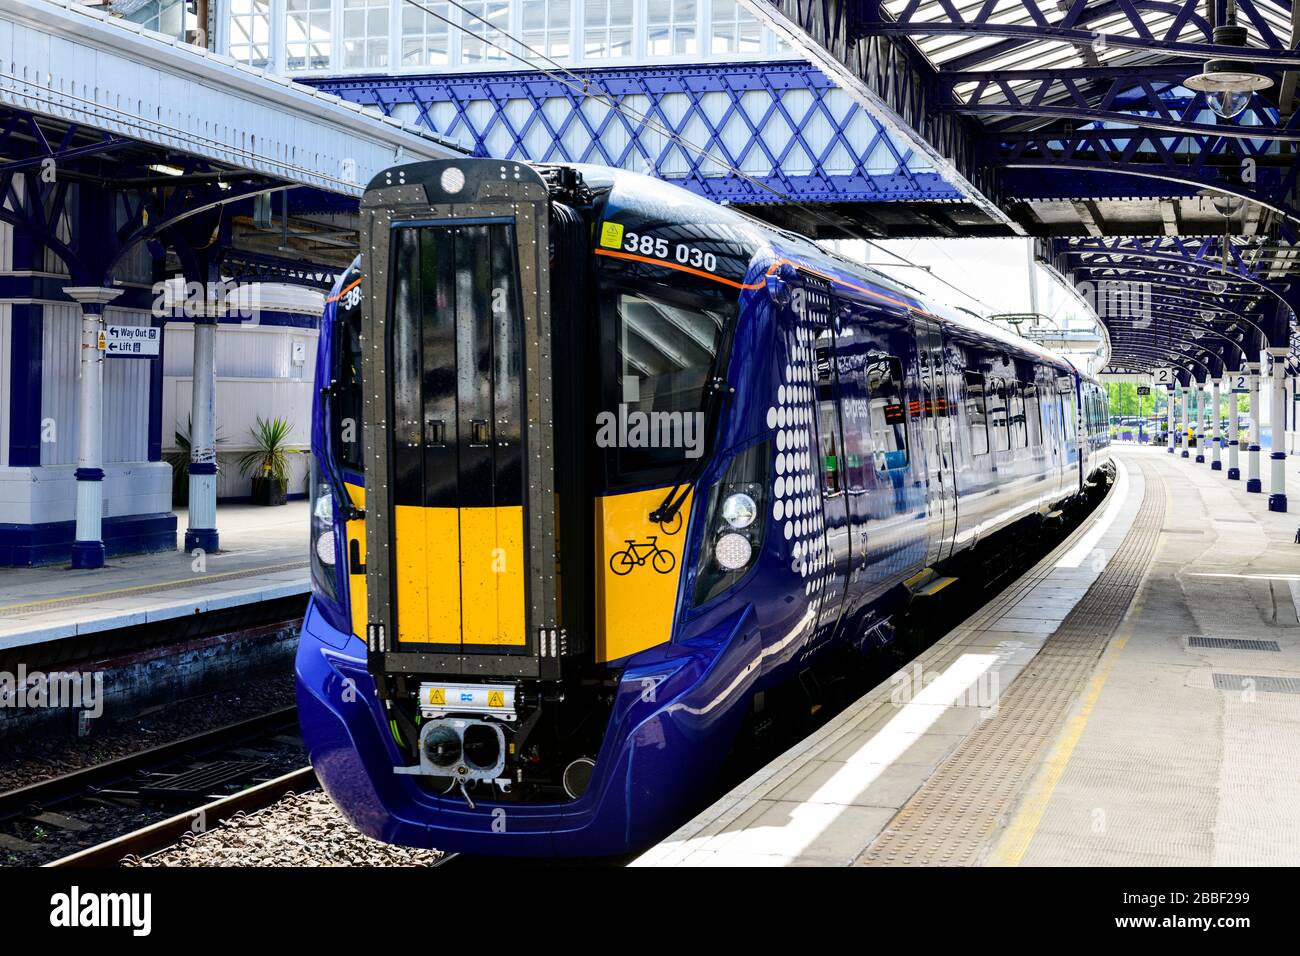 A ScotRail train arriving at the train station in Stirling, Scotland Stock Photo